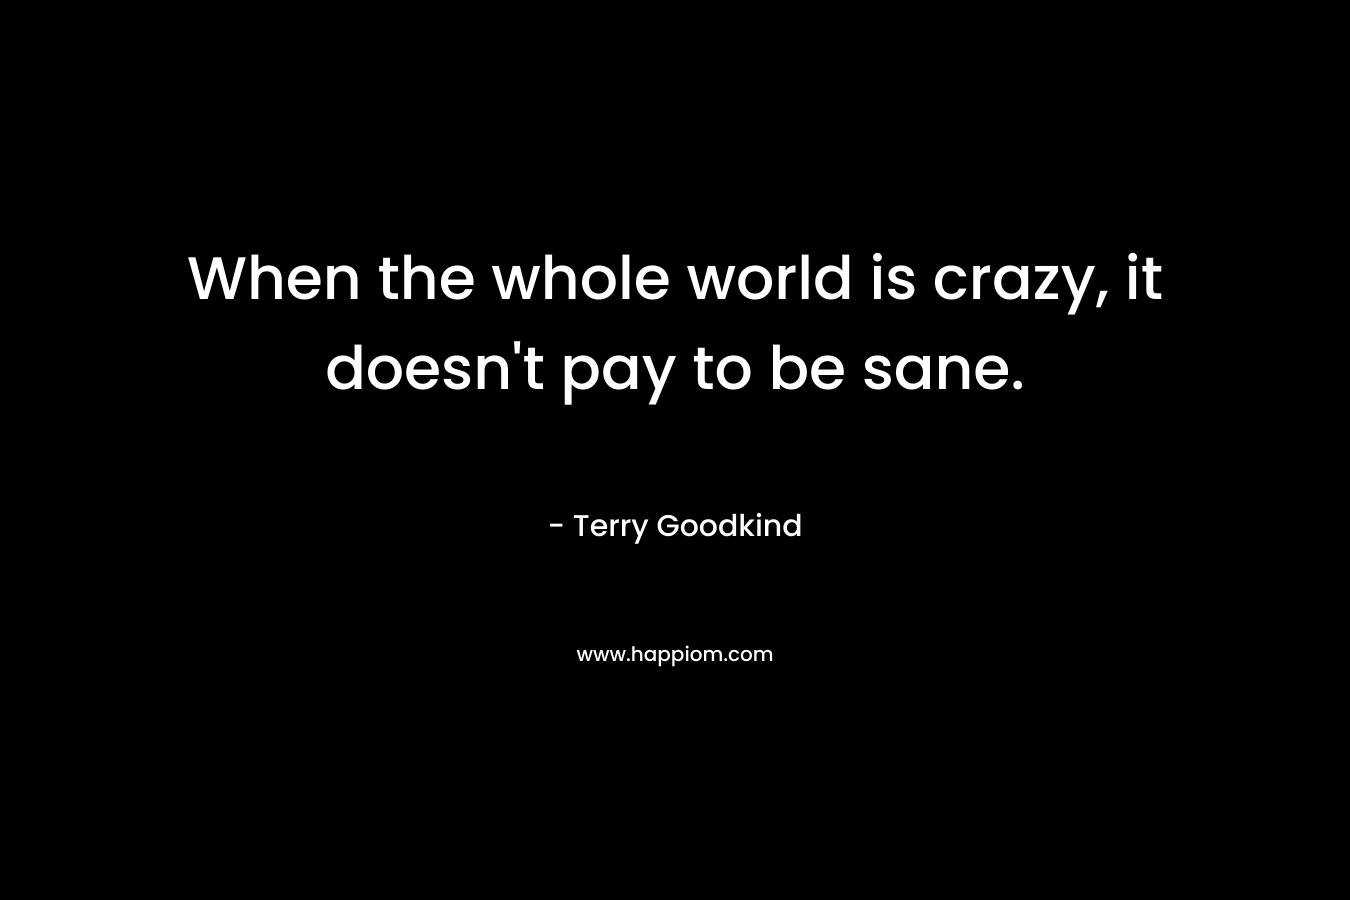 When the whole world is crazy, it doesn’t pay to be sane. – Terry Goodkind